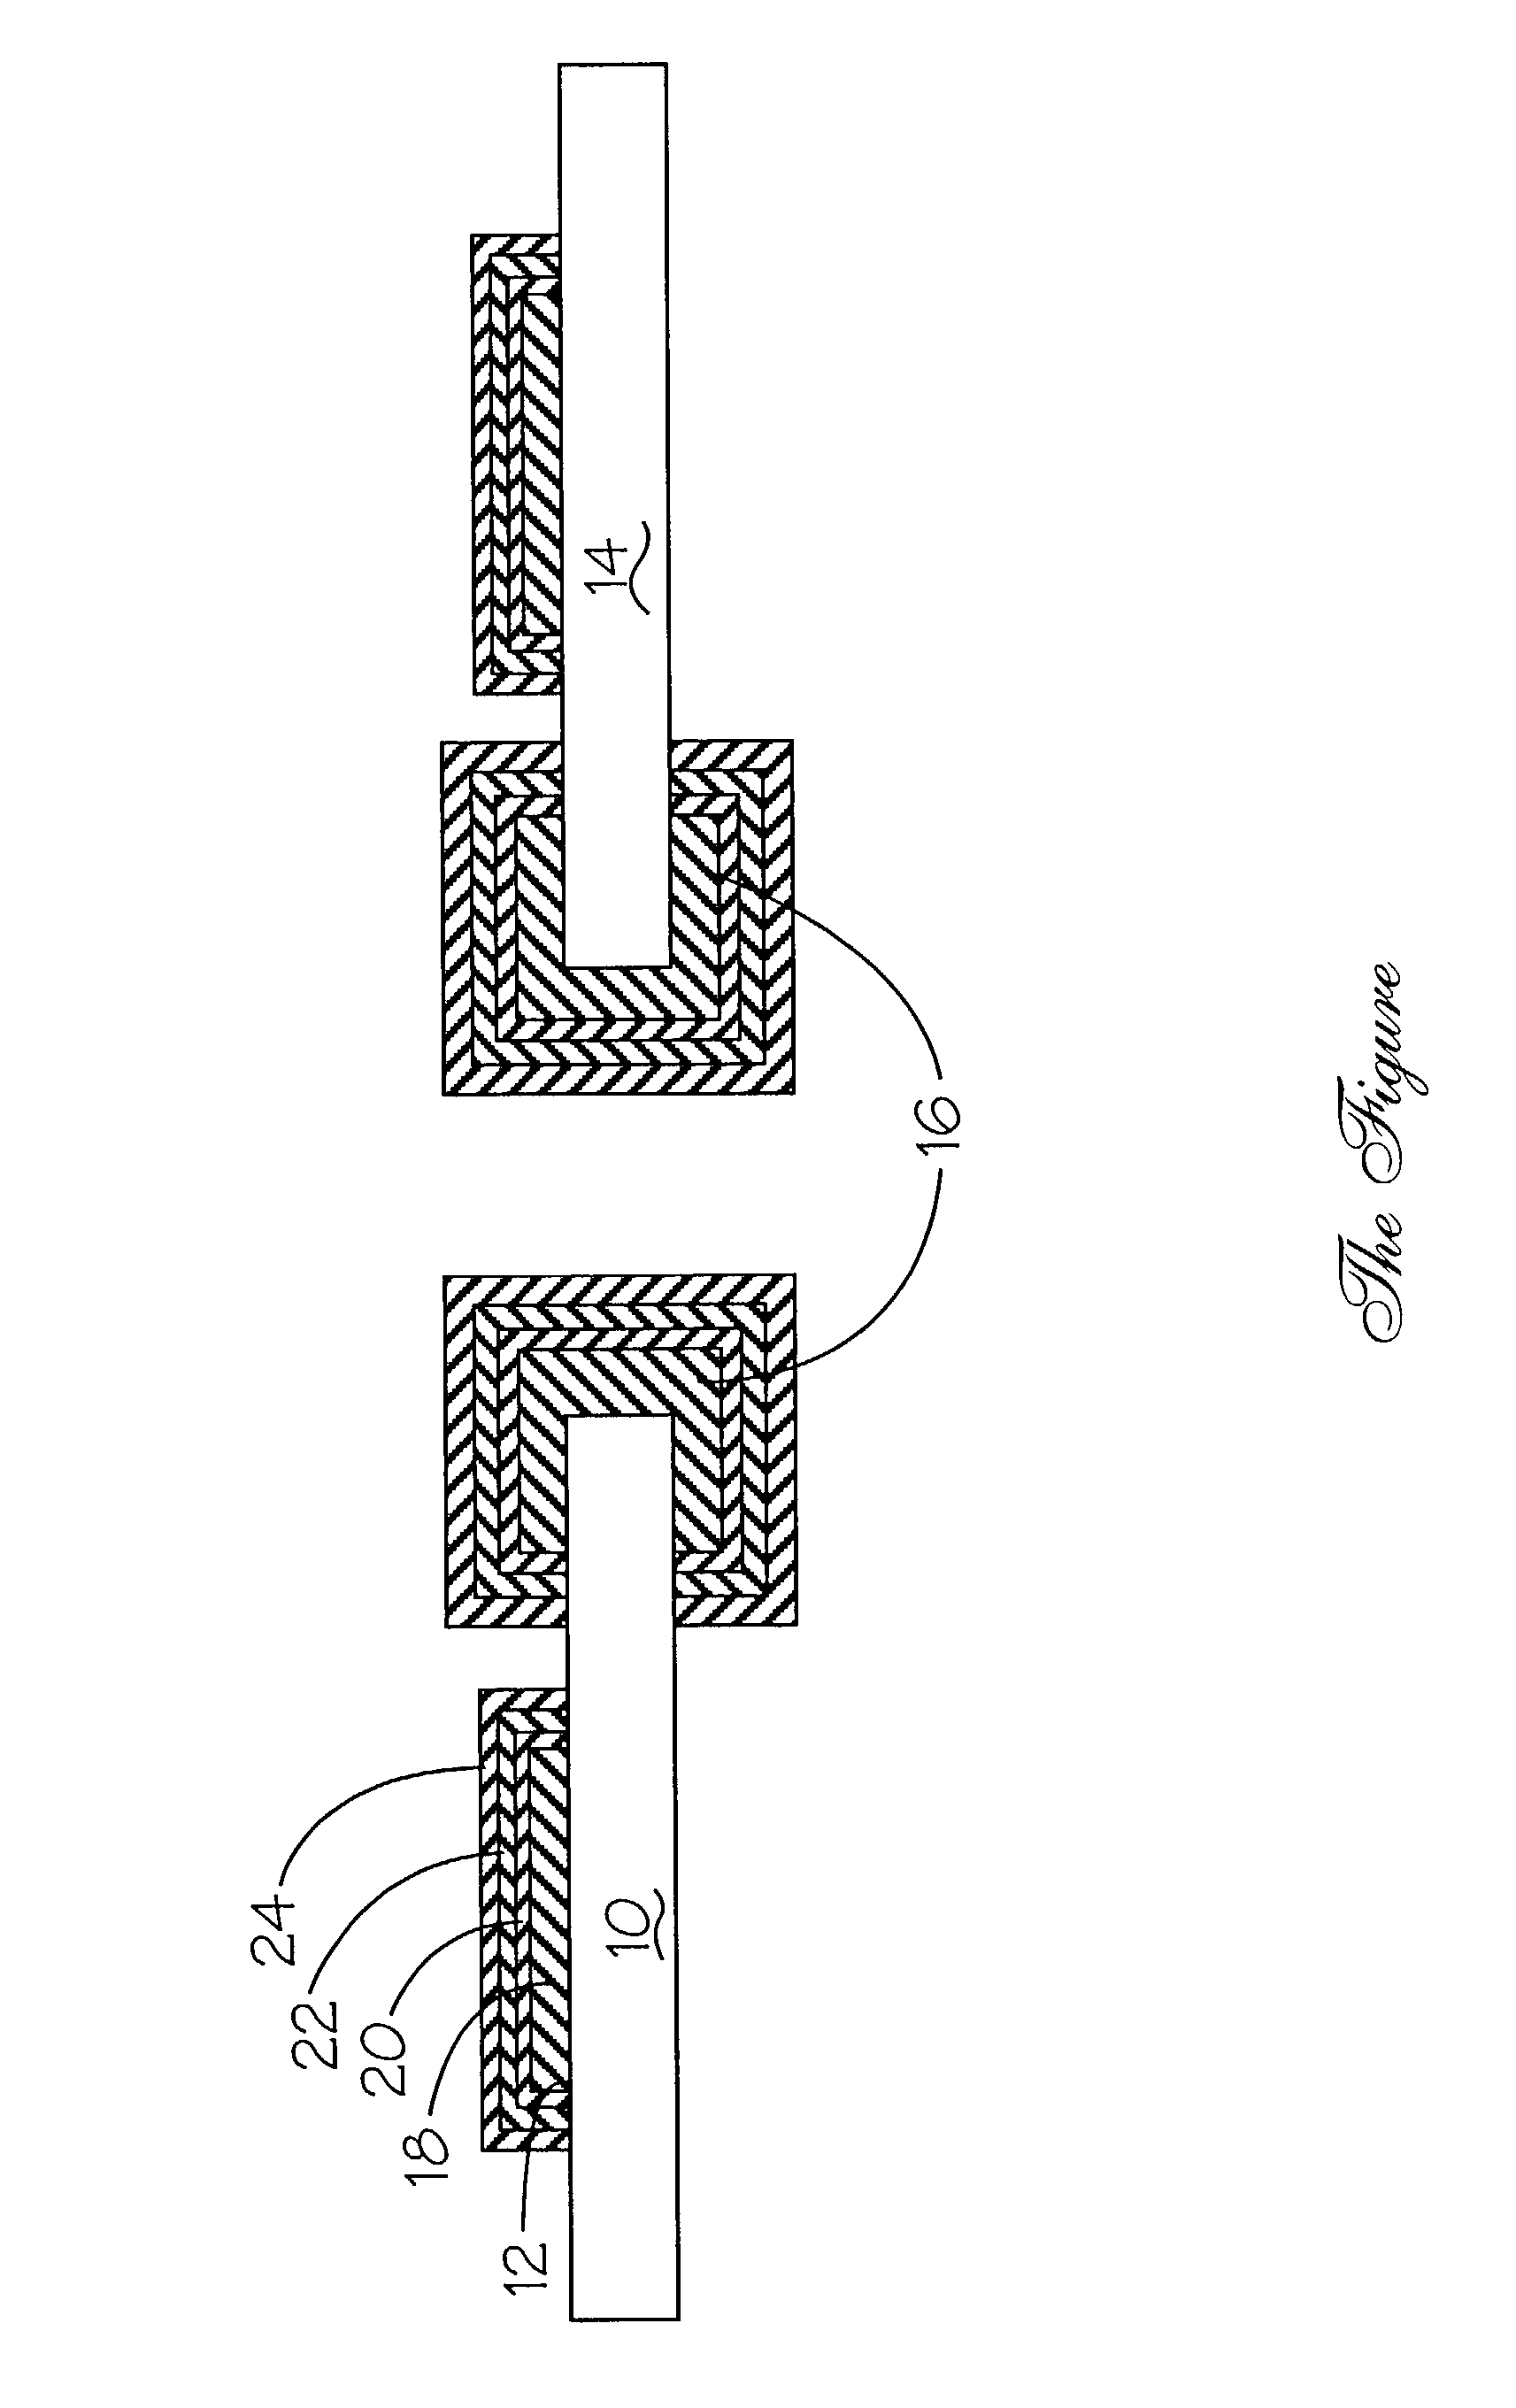 Process for manufacturing a printed wiring board